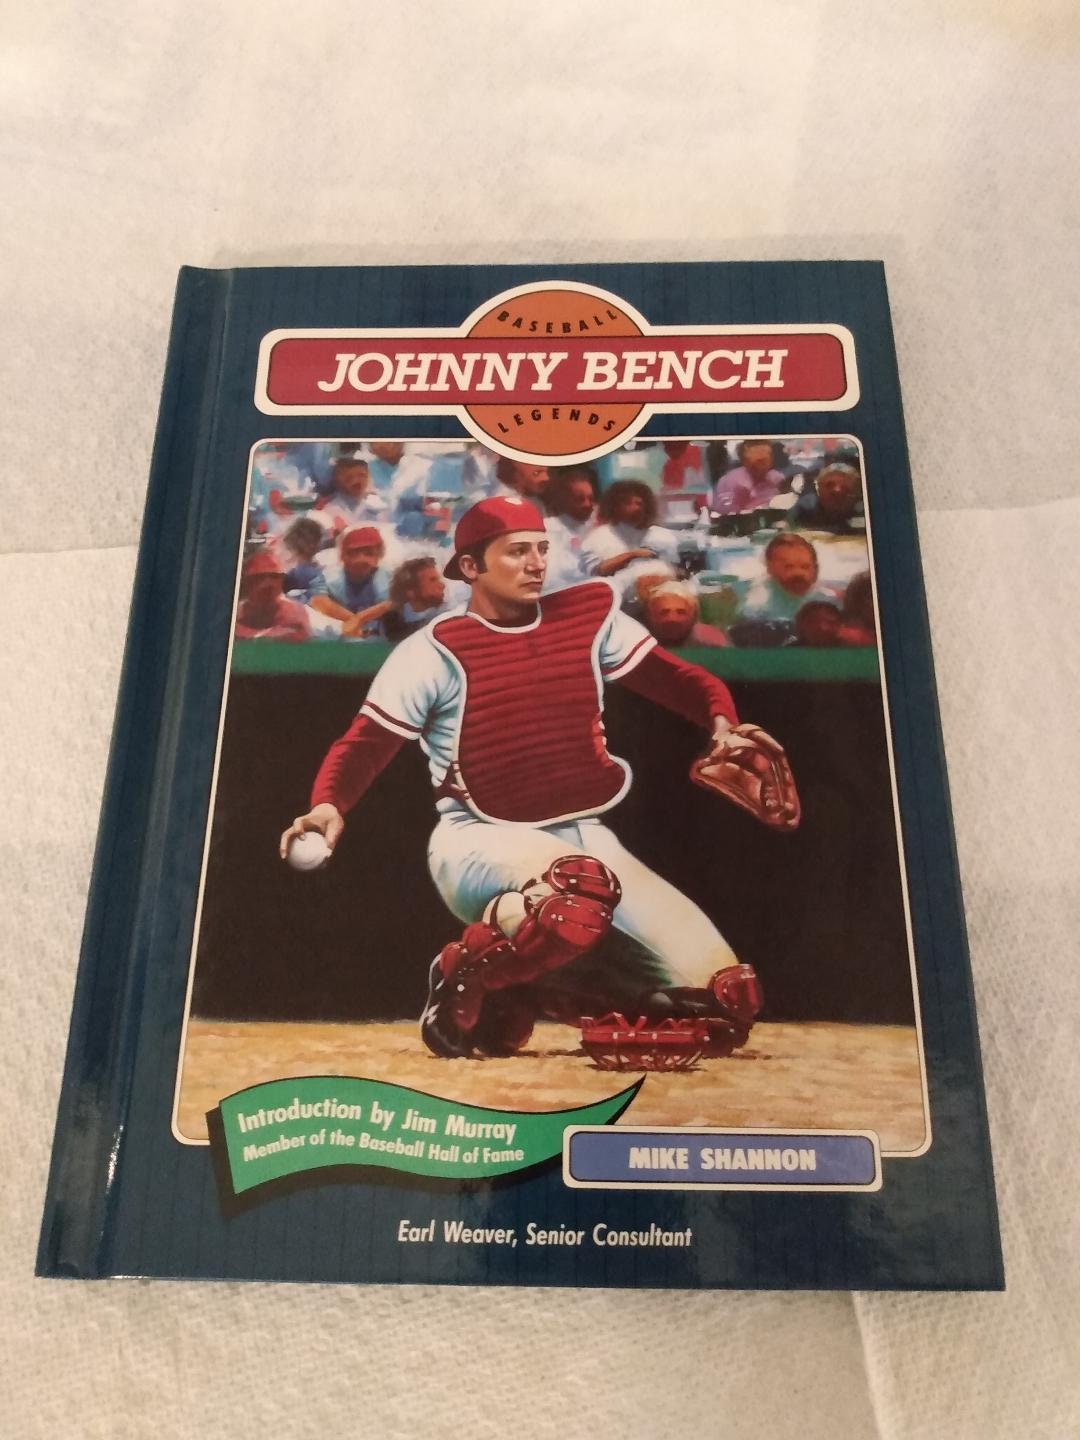 Reds legend Johnny Bench to auction off memorabilia collection in